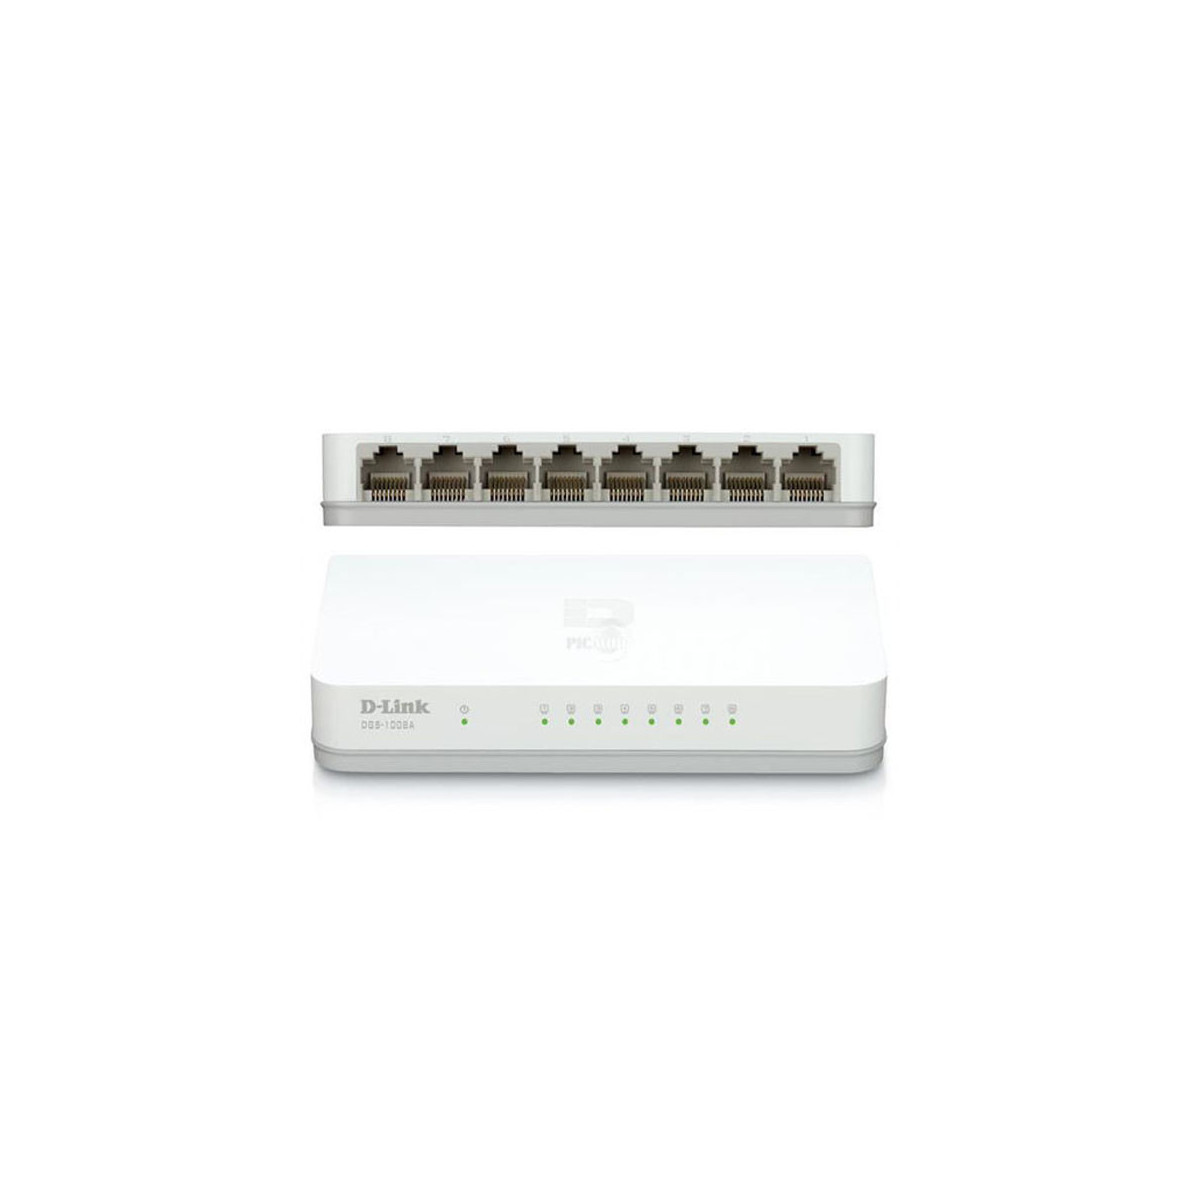 SWITCH 8 PORTS 10/100/1000 Mbps D-LINK